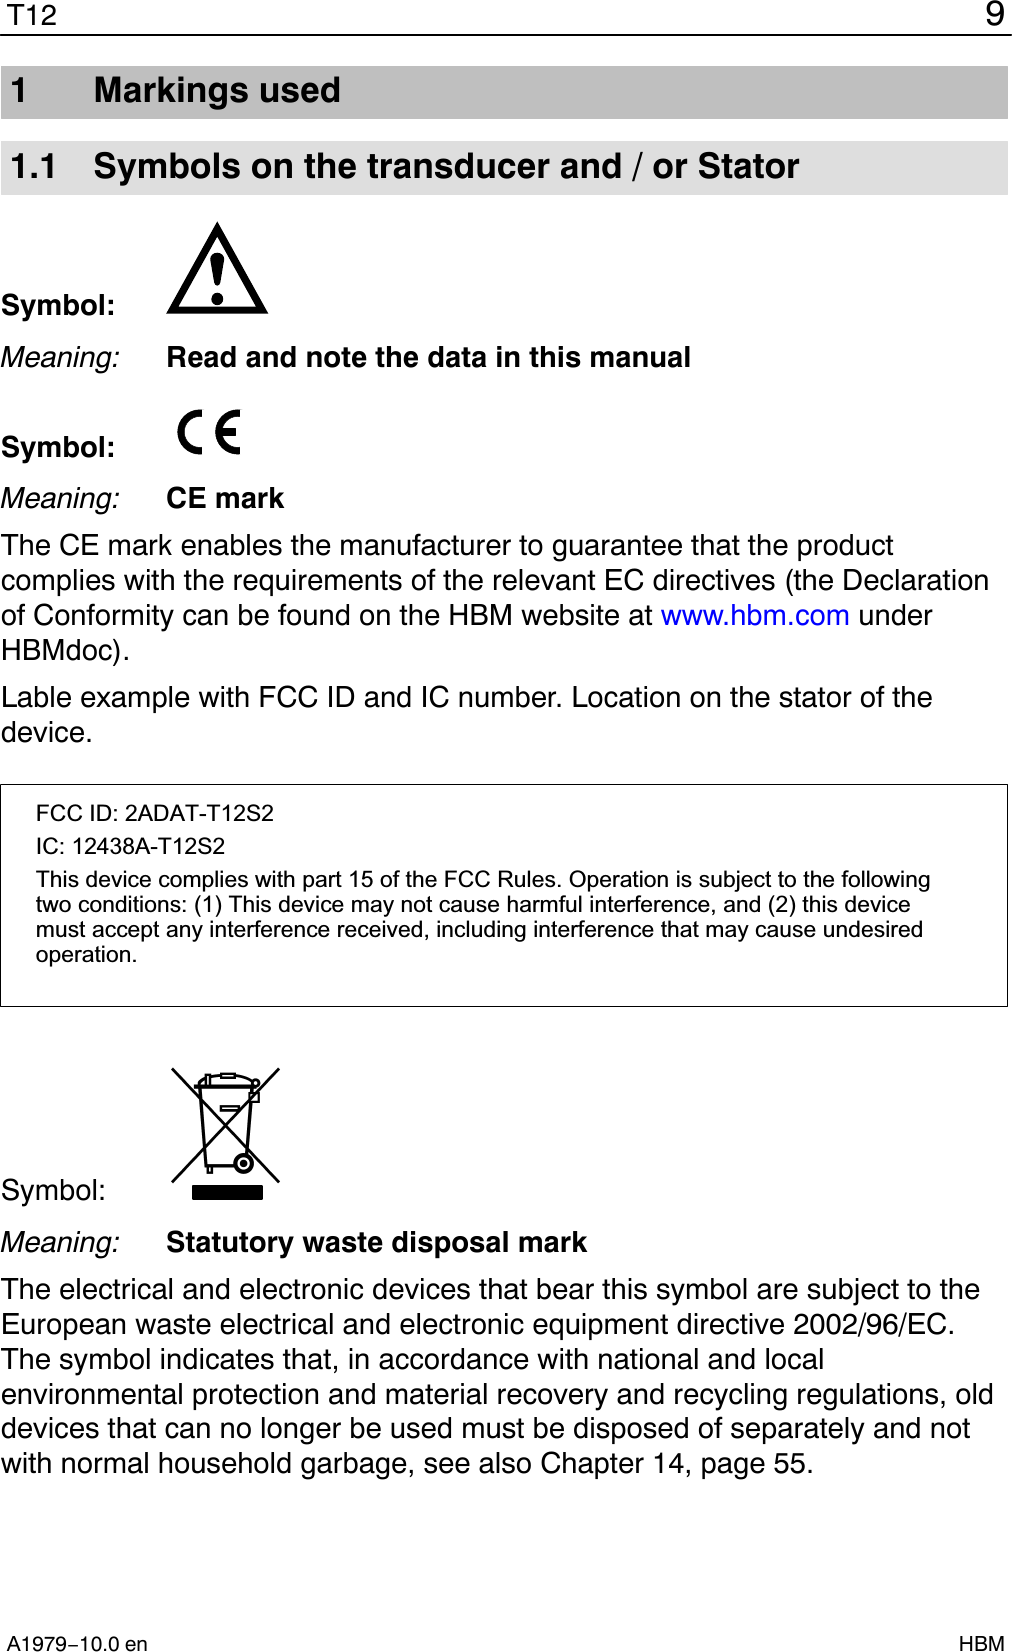 9T12A1979−10.0 en HBM1 Markings used1.1 Symbols on the transducer and / or StatorSymbol:Meaning: Read and note the data in this manualSymbol: Meaning: CE markThe CE mark enables the manufacturer to guarantee that the productcomplies with the requirements of the relevant EC directives (the Declarationof Conformity can be found on the HBM website at www.hbm.com underHBMdoc).Lable example with FCC ID and IC number. Location on the stator of thedevice.FCC ID: 2ADAT-T12S2IC: 12438AT12S2This device complies with part 15 of the FCC Rules. Operation is subject to the followingtwo conditions: (1) This device may not cause harmful interference, and (2) this devicemust accept any interference received, including interference that may cause undesiredoperation.Symbol: Meaning: Statutory waste disposal markThe electrical and electronic devices that bear this symbol are subject to theEuropean waste electrical and electronic equipment directive 2002/96/EC.The symbol indicates that, in accordance with national and localenvironmental protection and material recovery and recycling regulations, olddevices that can no longer be used must be disposed of separately and notwith normal household garbage, see also Chapter 14, page 55.